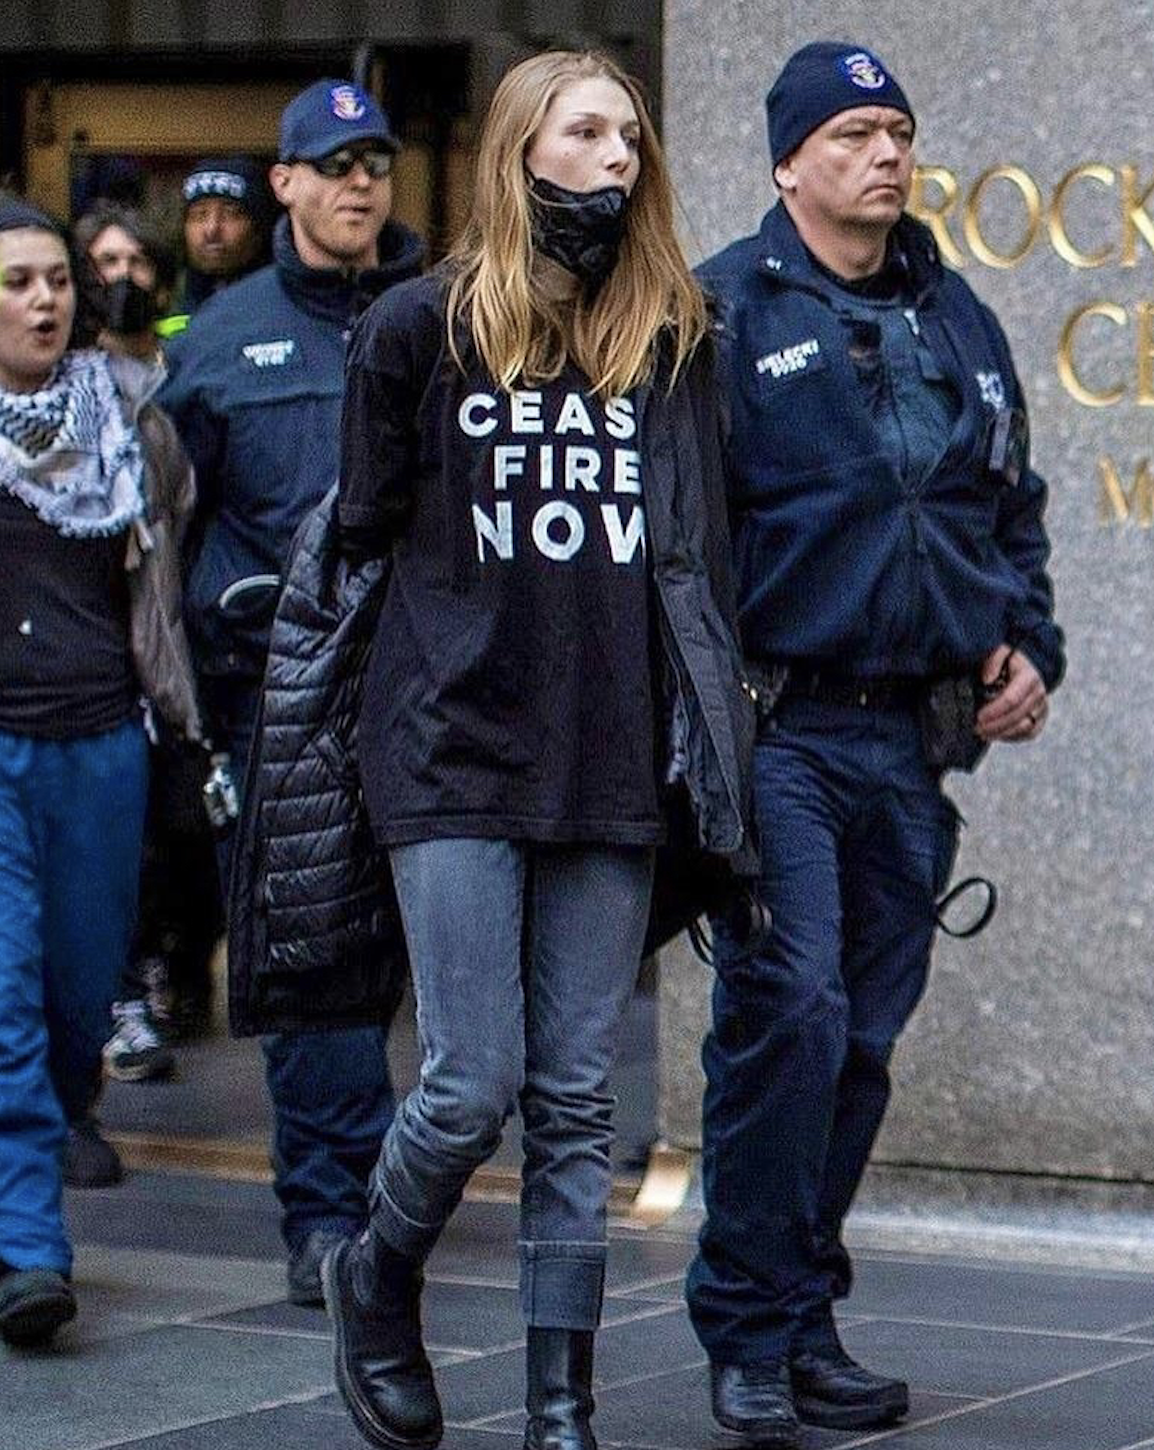 Hunter in protest with &#x27;CEASE FIRE NOW&#x27; shirt being escorted by police